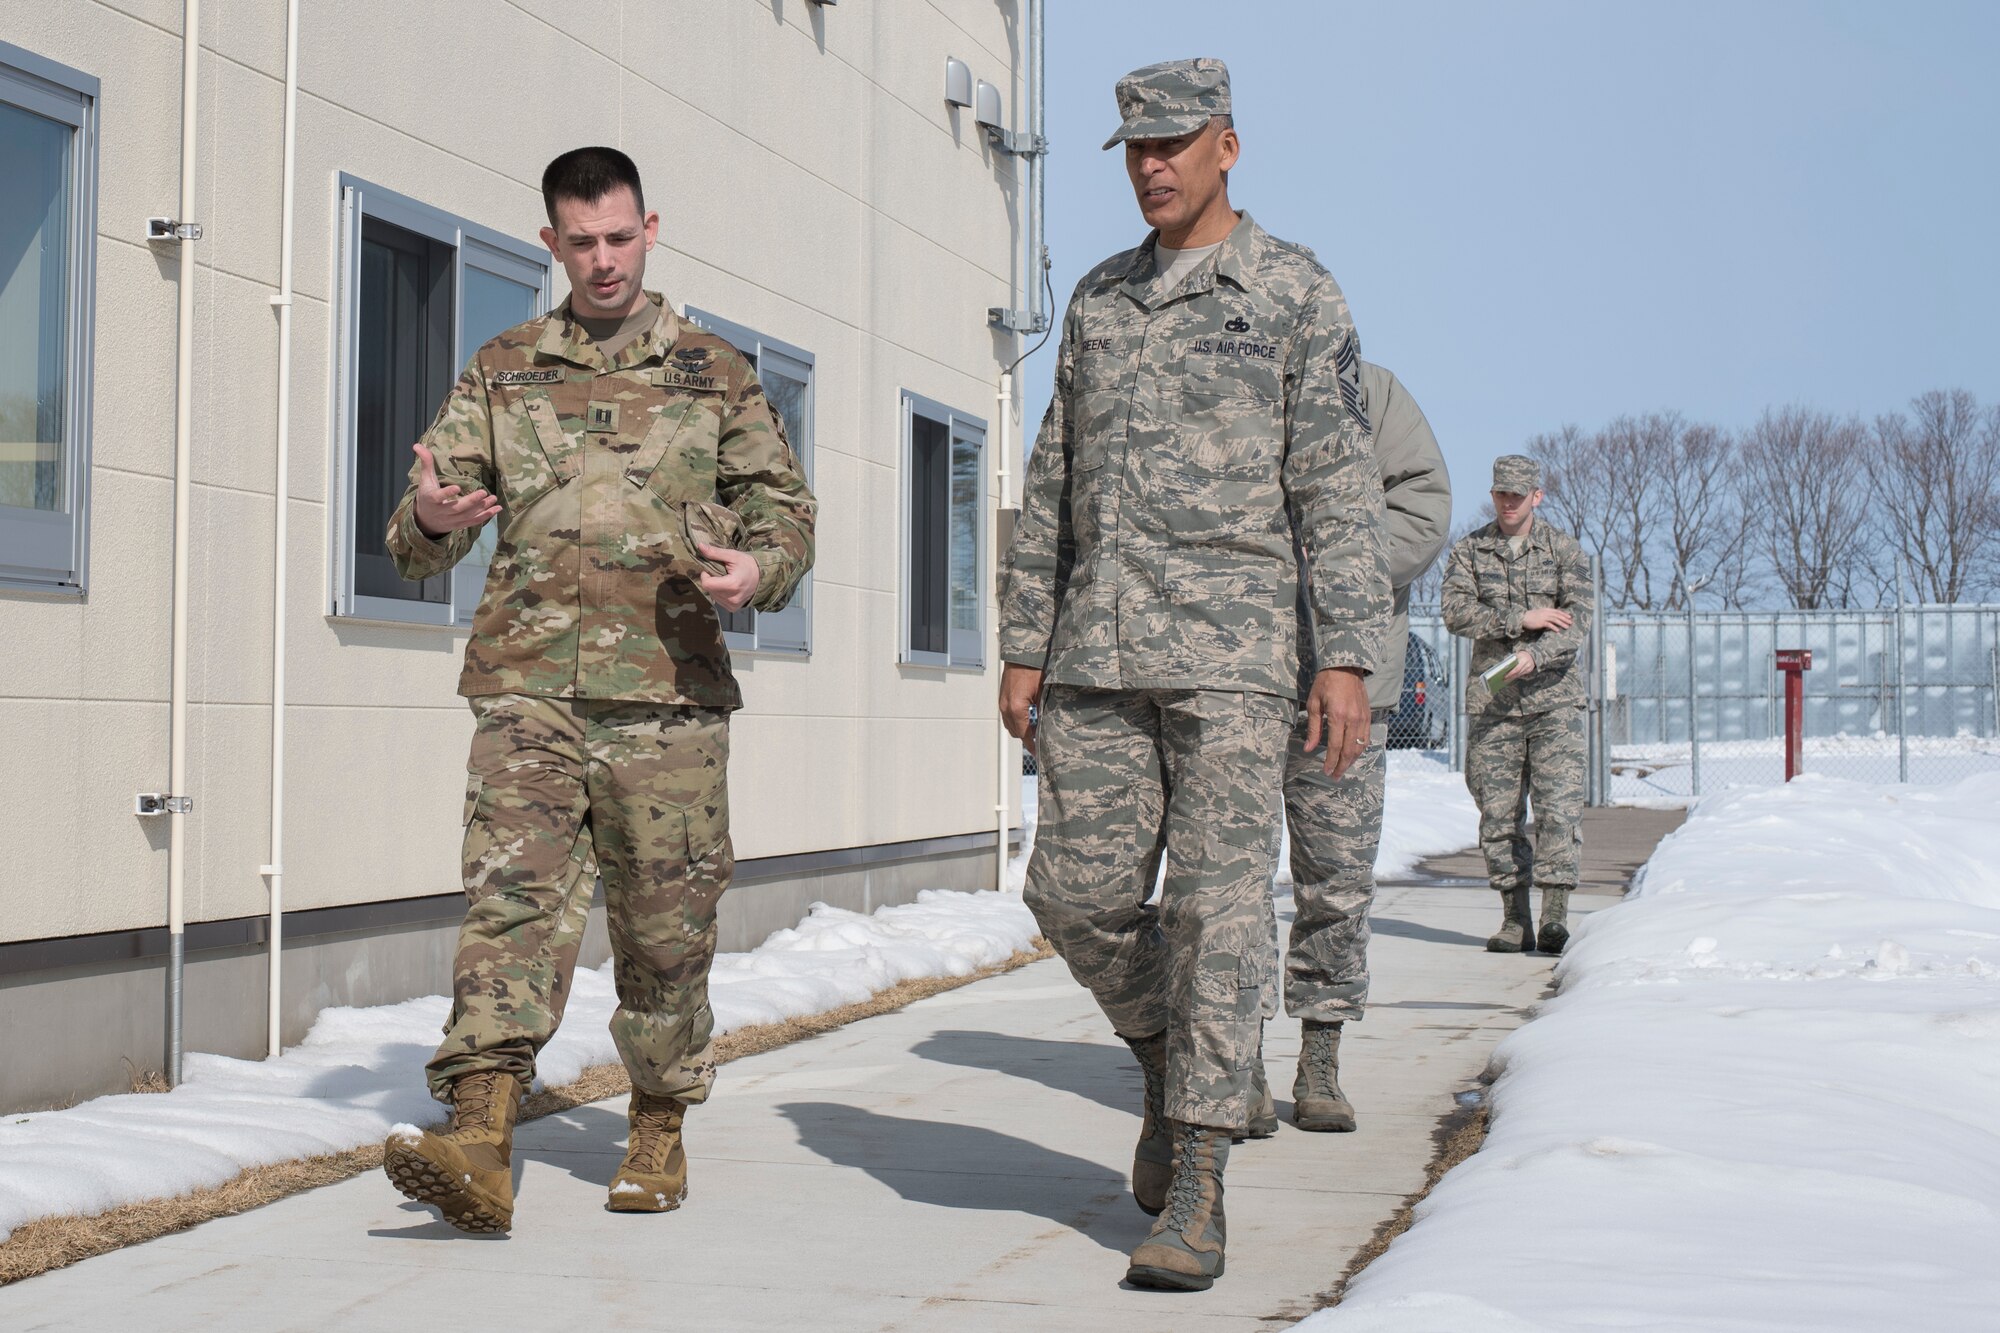 U.S. Army Capt. Lee Schroeder, left, the Delta Detachment, 1st Space Company, Joint Tactic Army Ground Station commander, walks with U.S. Air Force Chief Master Sgt. Terrence A. Greene, right, the United States Forces Japan and Fifth Air Force command chief, during his visit to the JTAGS facility at Misawa Air Base, Japan, Feb. 23, 2018. Greene’s tour included meeting with Team Misawa and Japan Air Self-Defense Force members in order to better understand the capabilities and responsibilities each unit contributes to the “fight tonight” mentality. (U.S. Air Force photo by Airman 1st Class Collette Brooks)